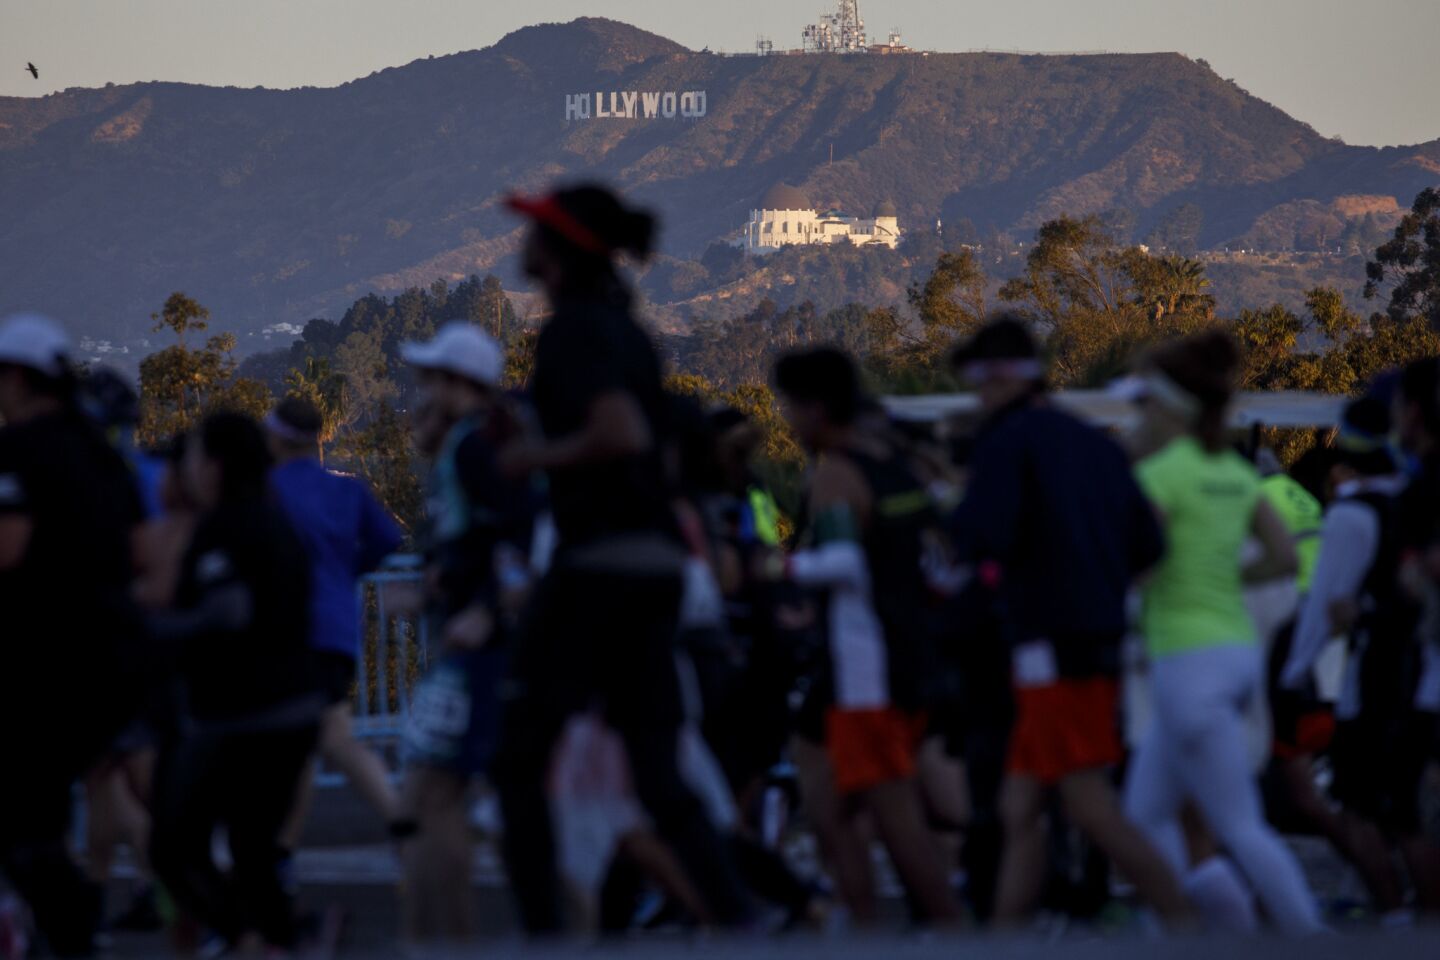 The Hollywood sign and Griffith Observatory frame runners in L.A. Marathon.